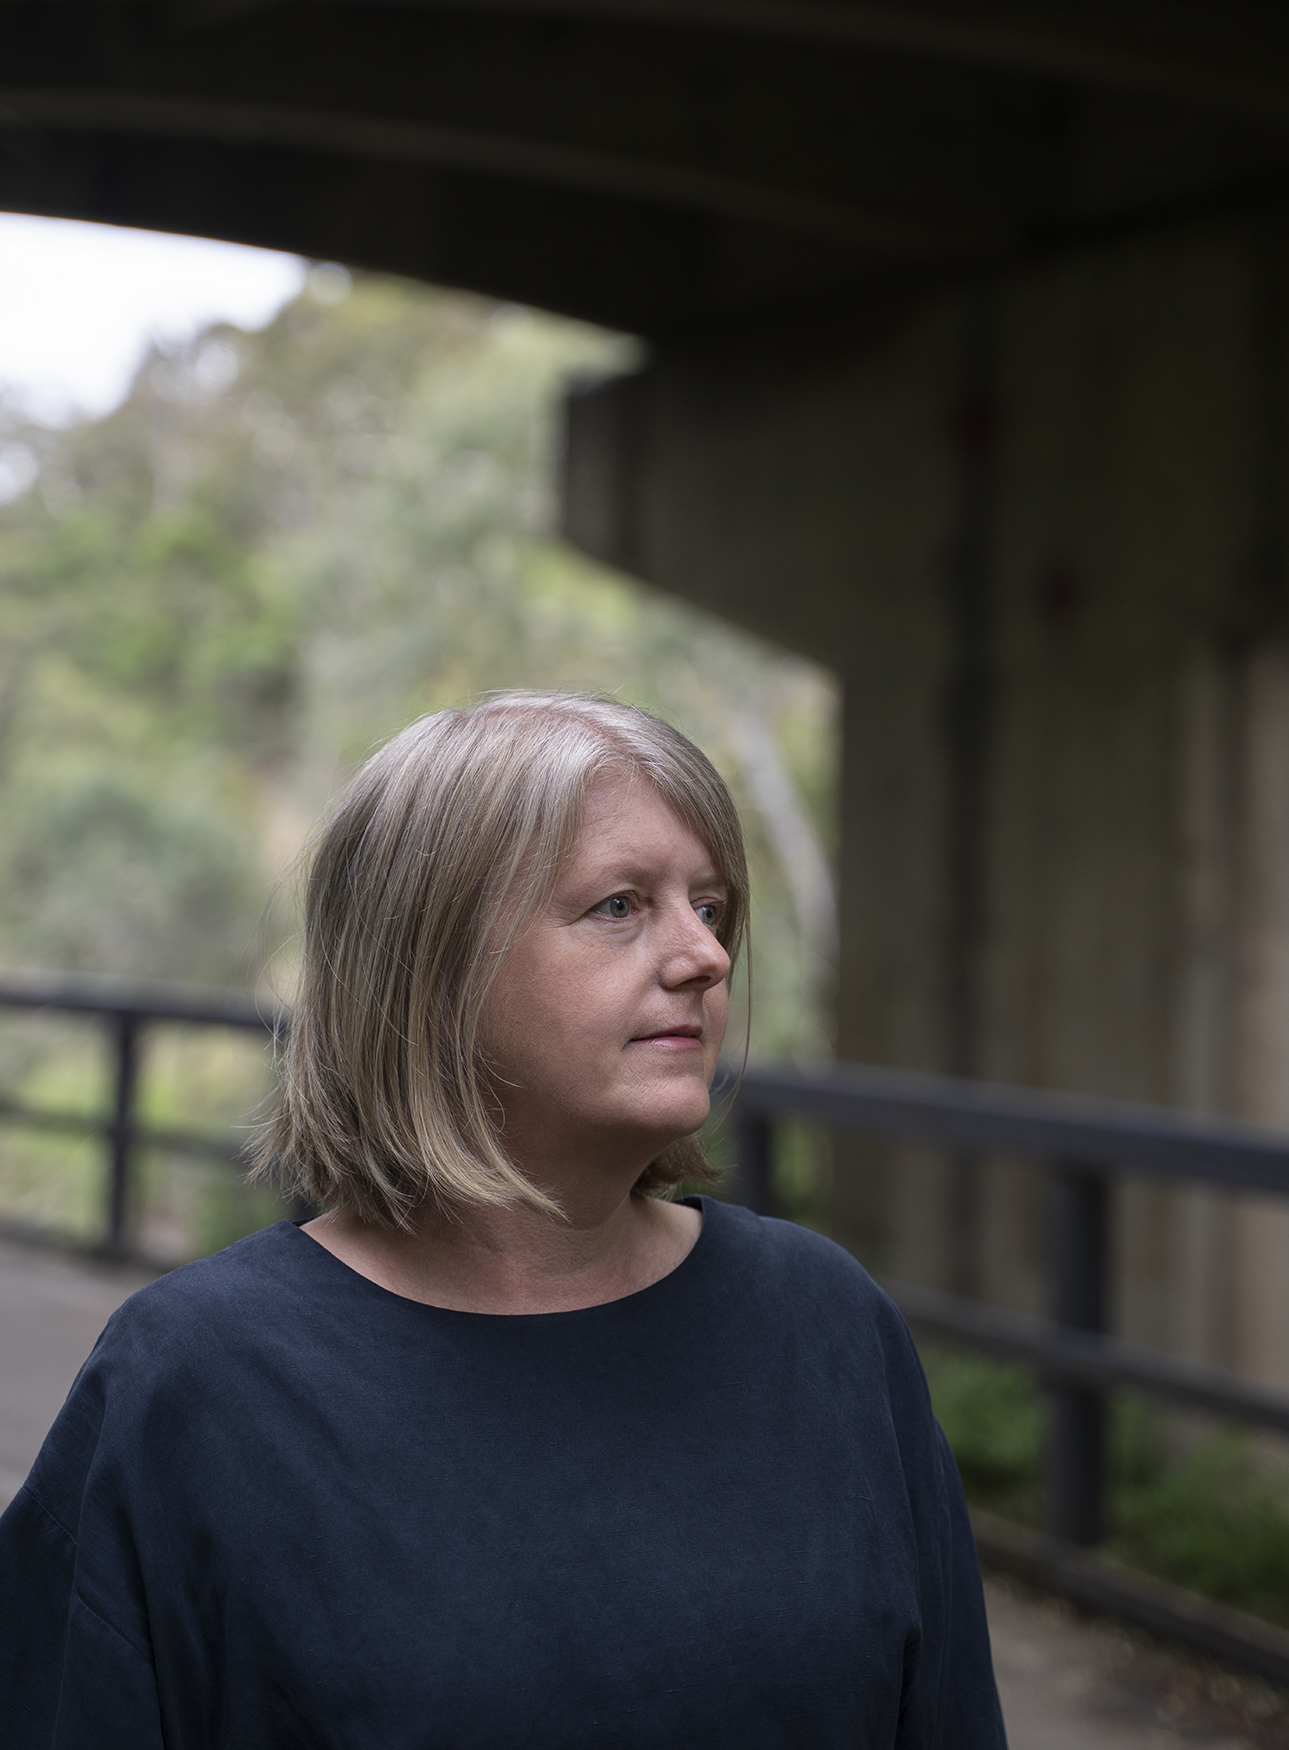 A blond middle-aged woman in a blue top looks melancholy as she stands under a bridge.